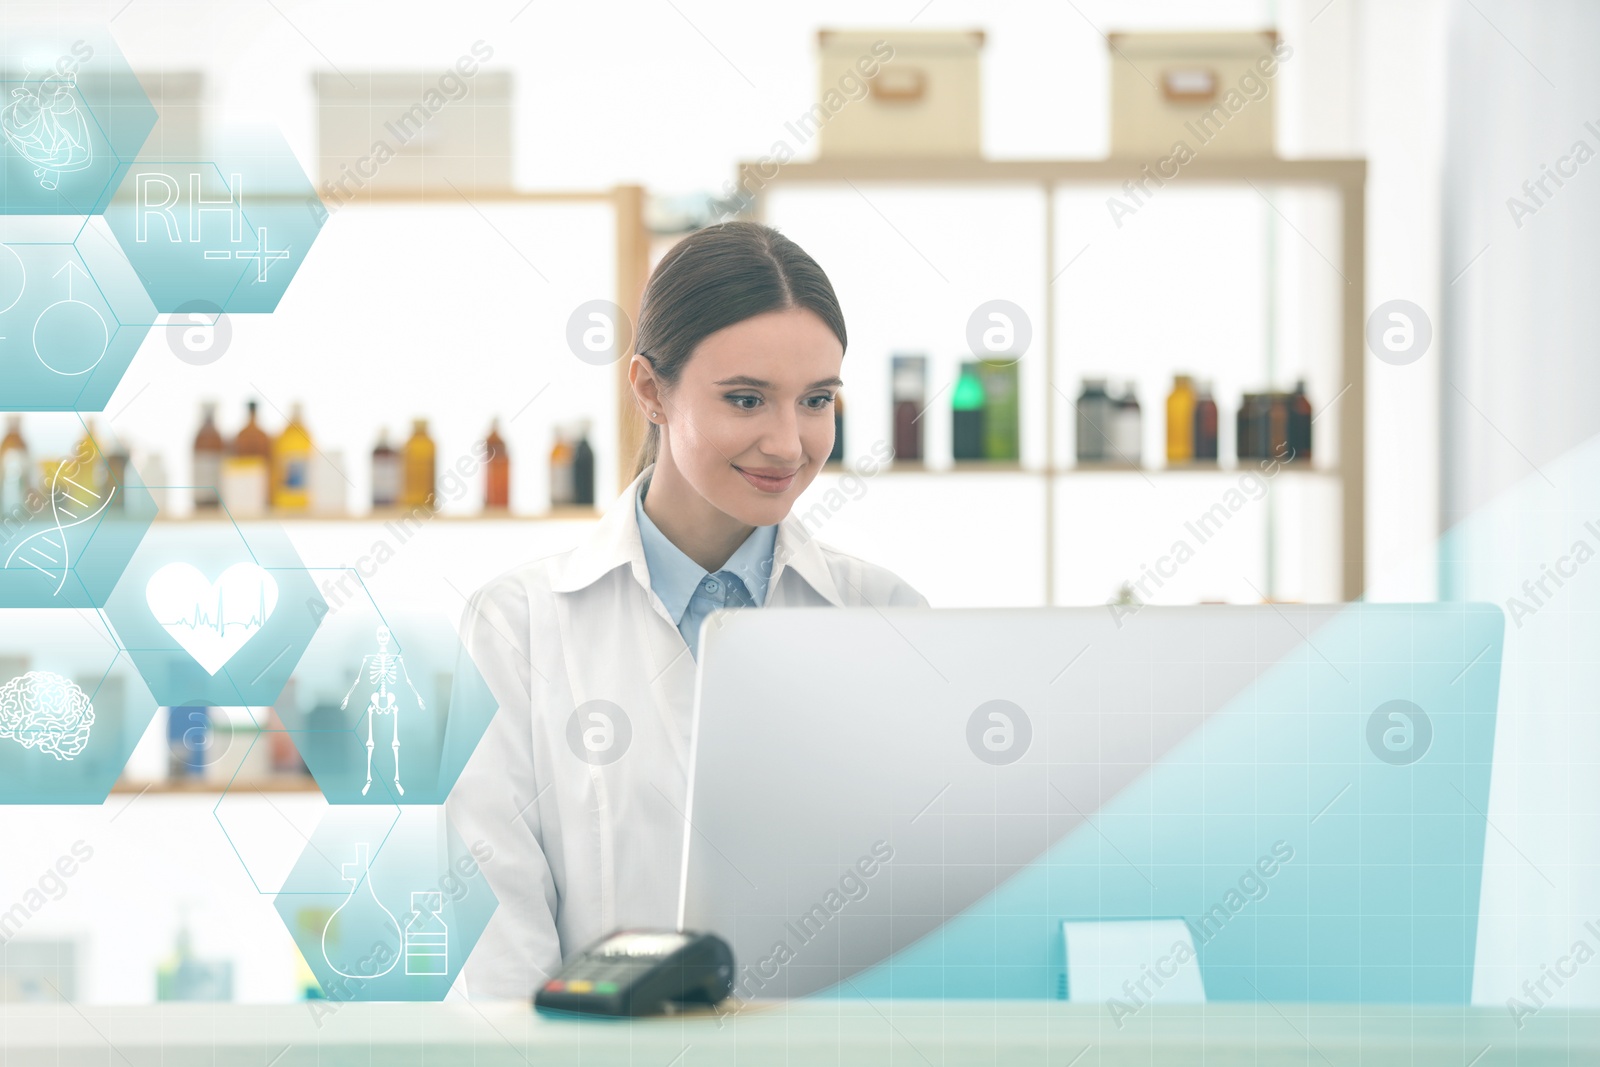 Image of Professional pharmacist working with computer in drugstore